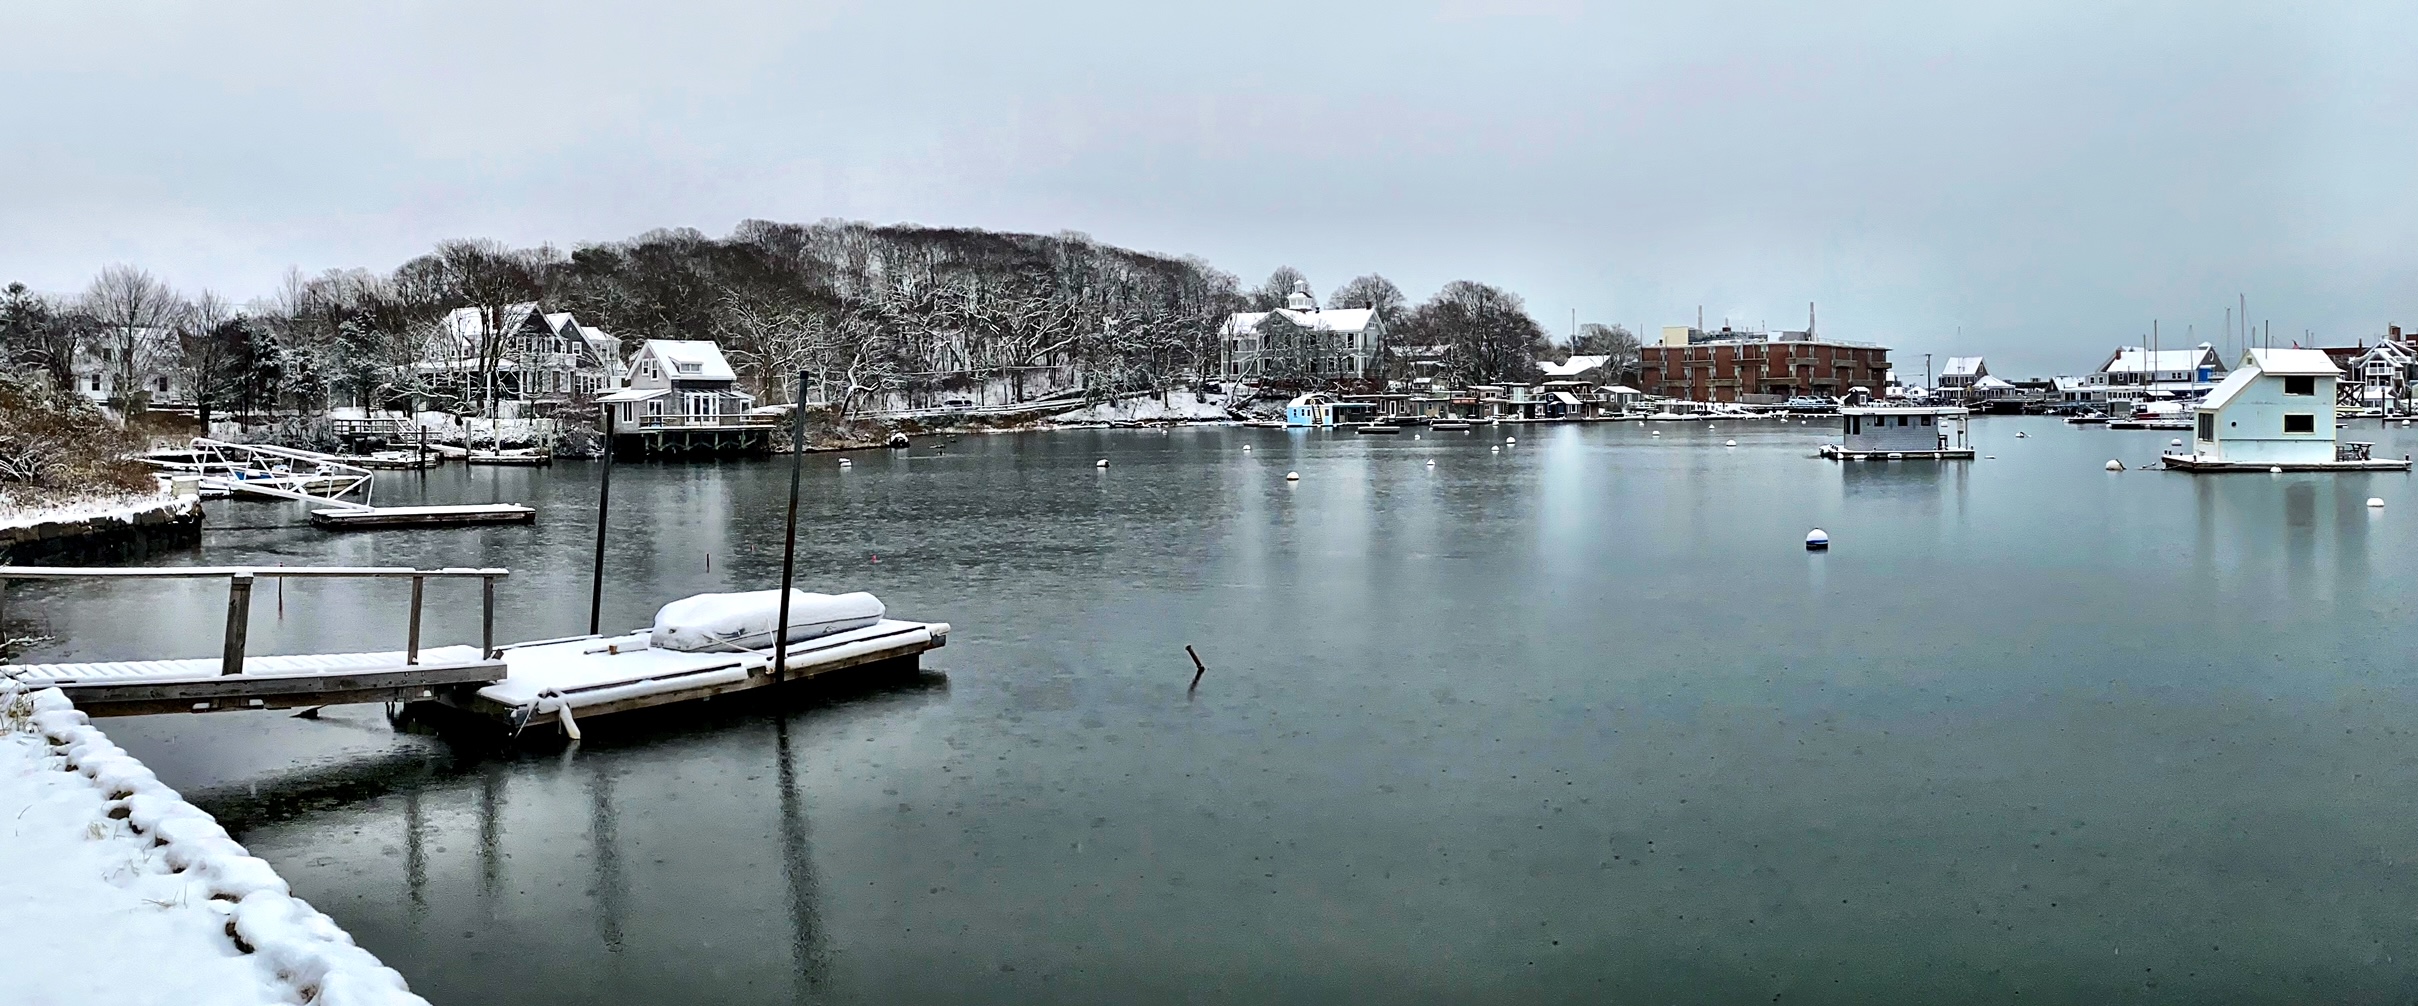 Snow News from Woods Hole